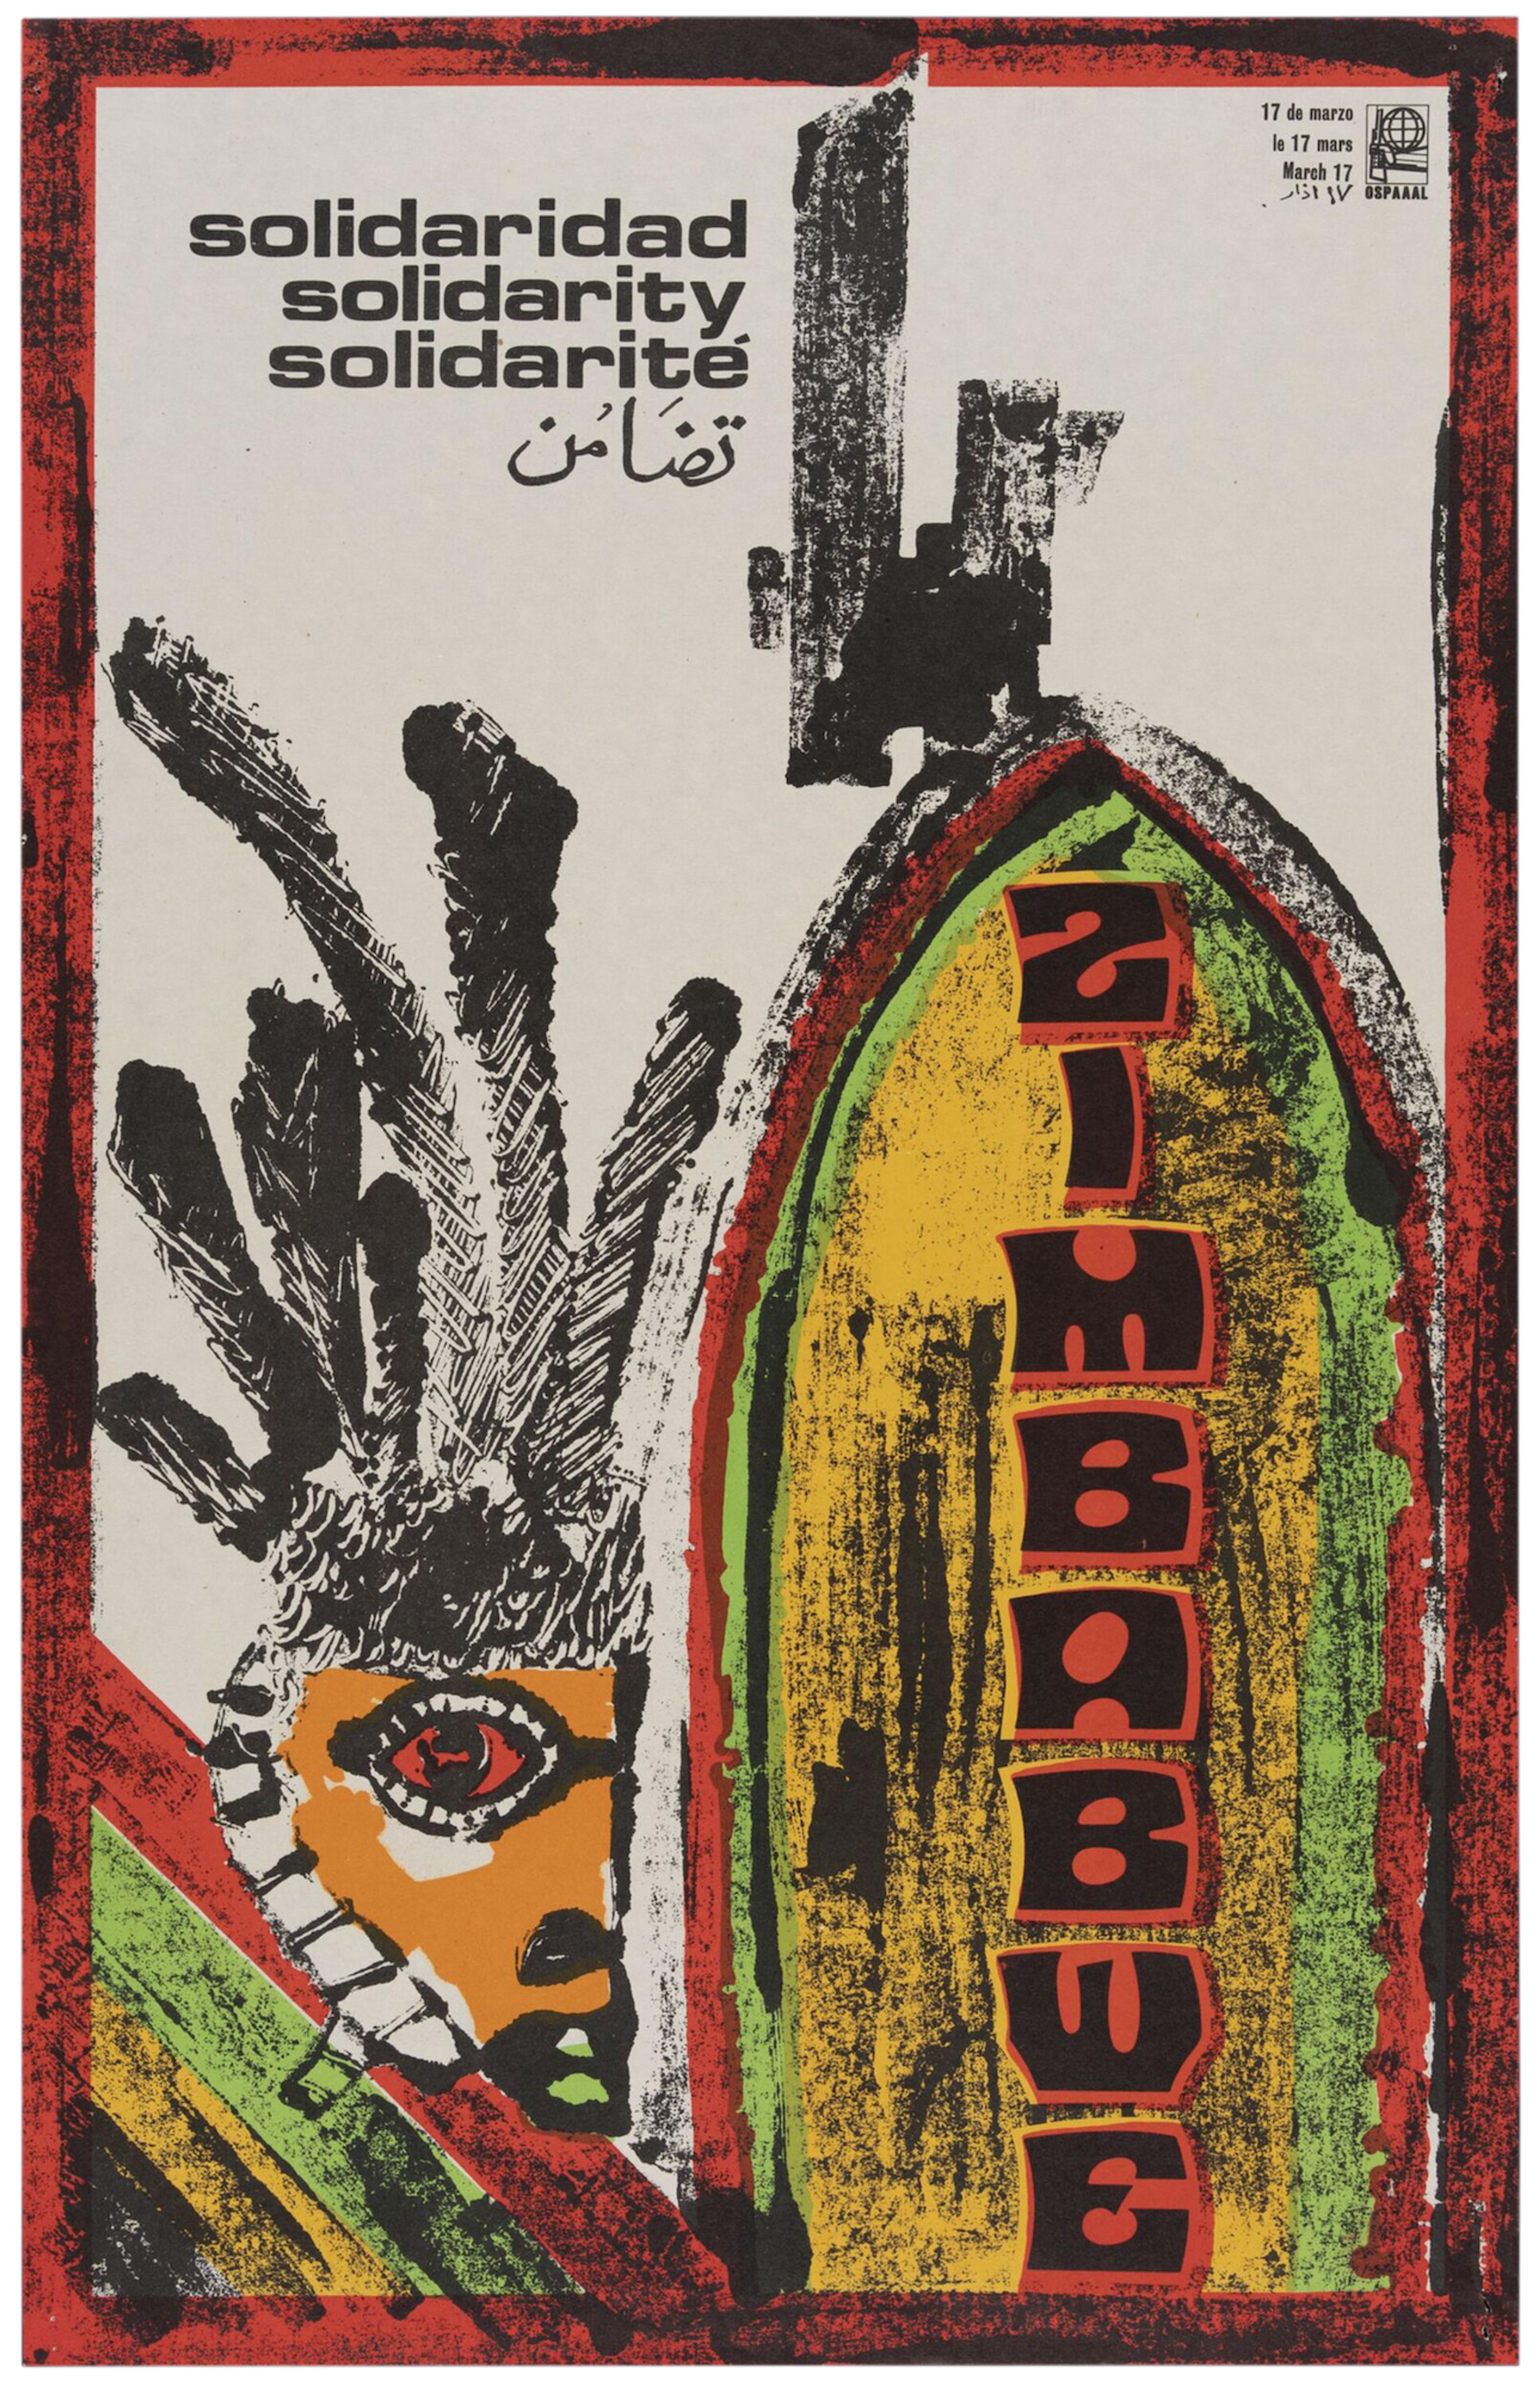 Poster design with textured black brush strokes over red yellow and green showing a face with a headdress looking out between two abstract shapes. The shape on the right has the word 'ZIMBABWE' running vertically down in block-like letters.